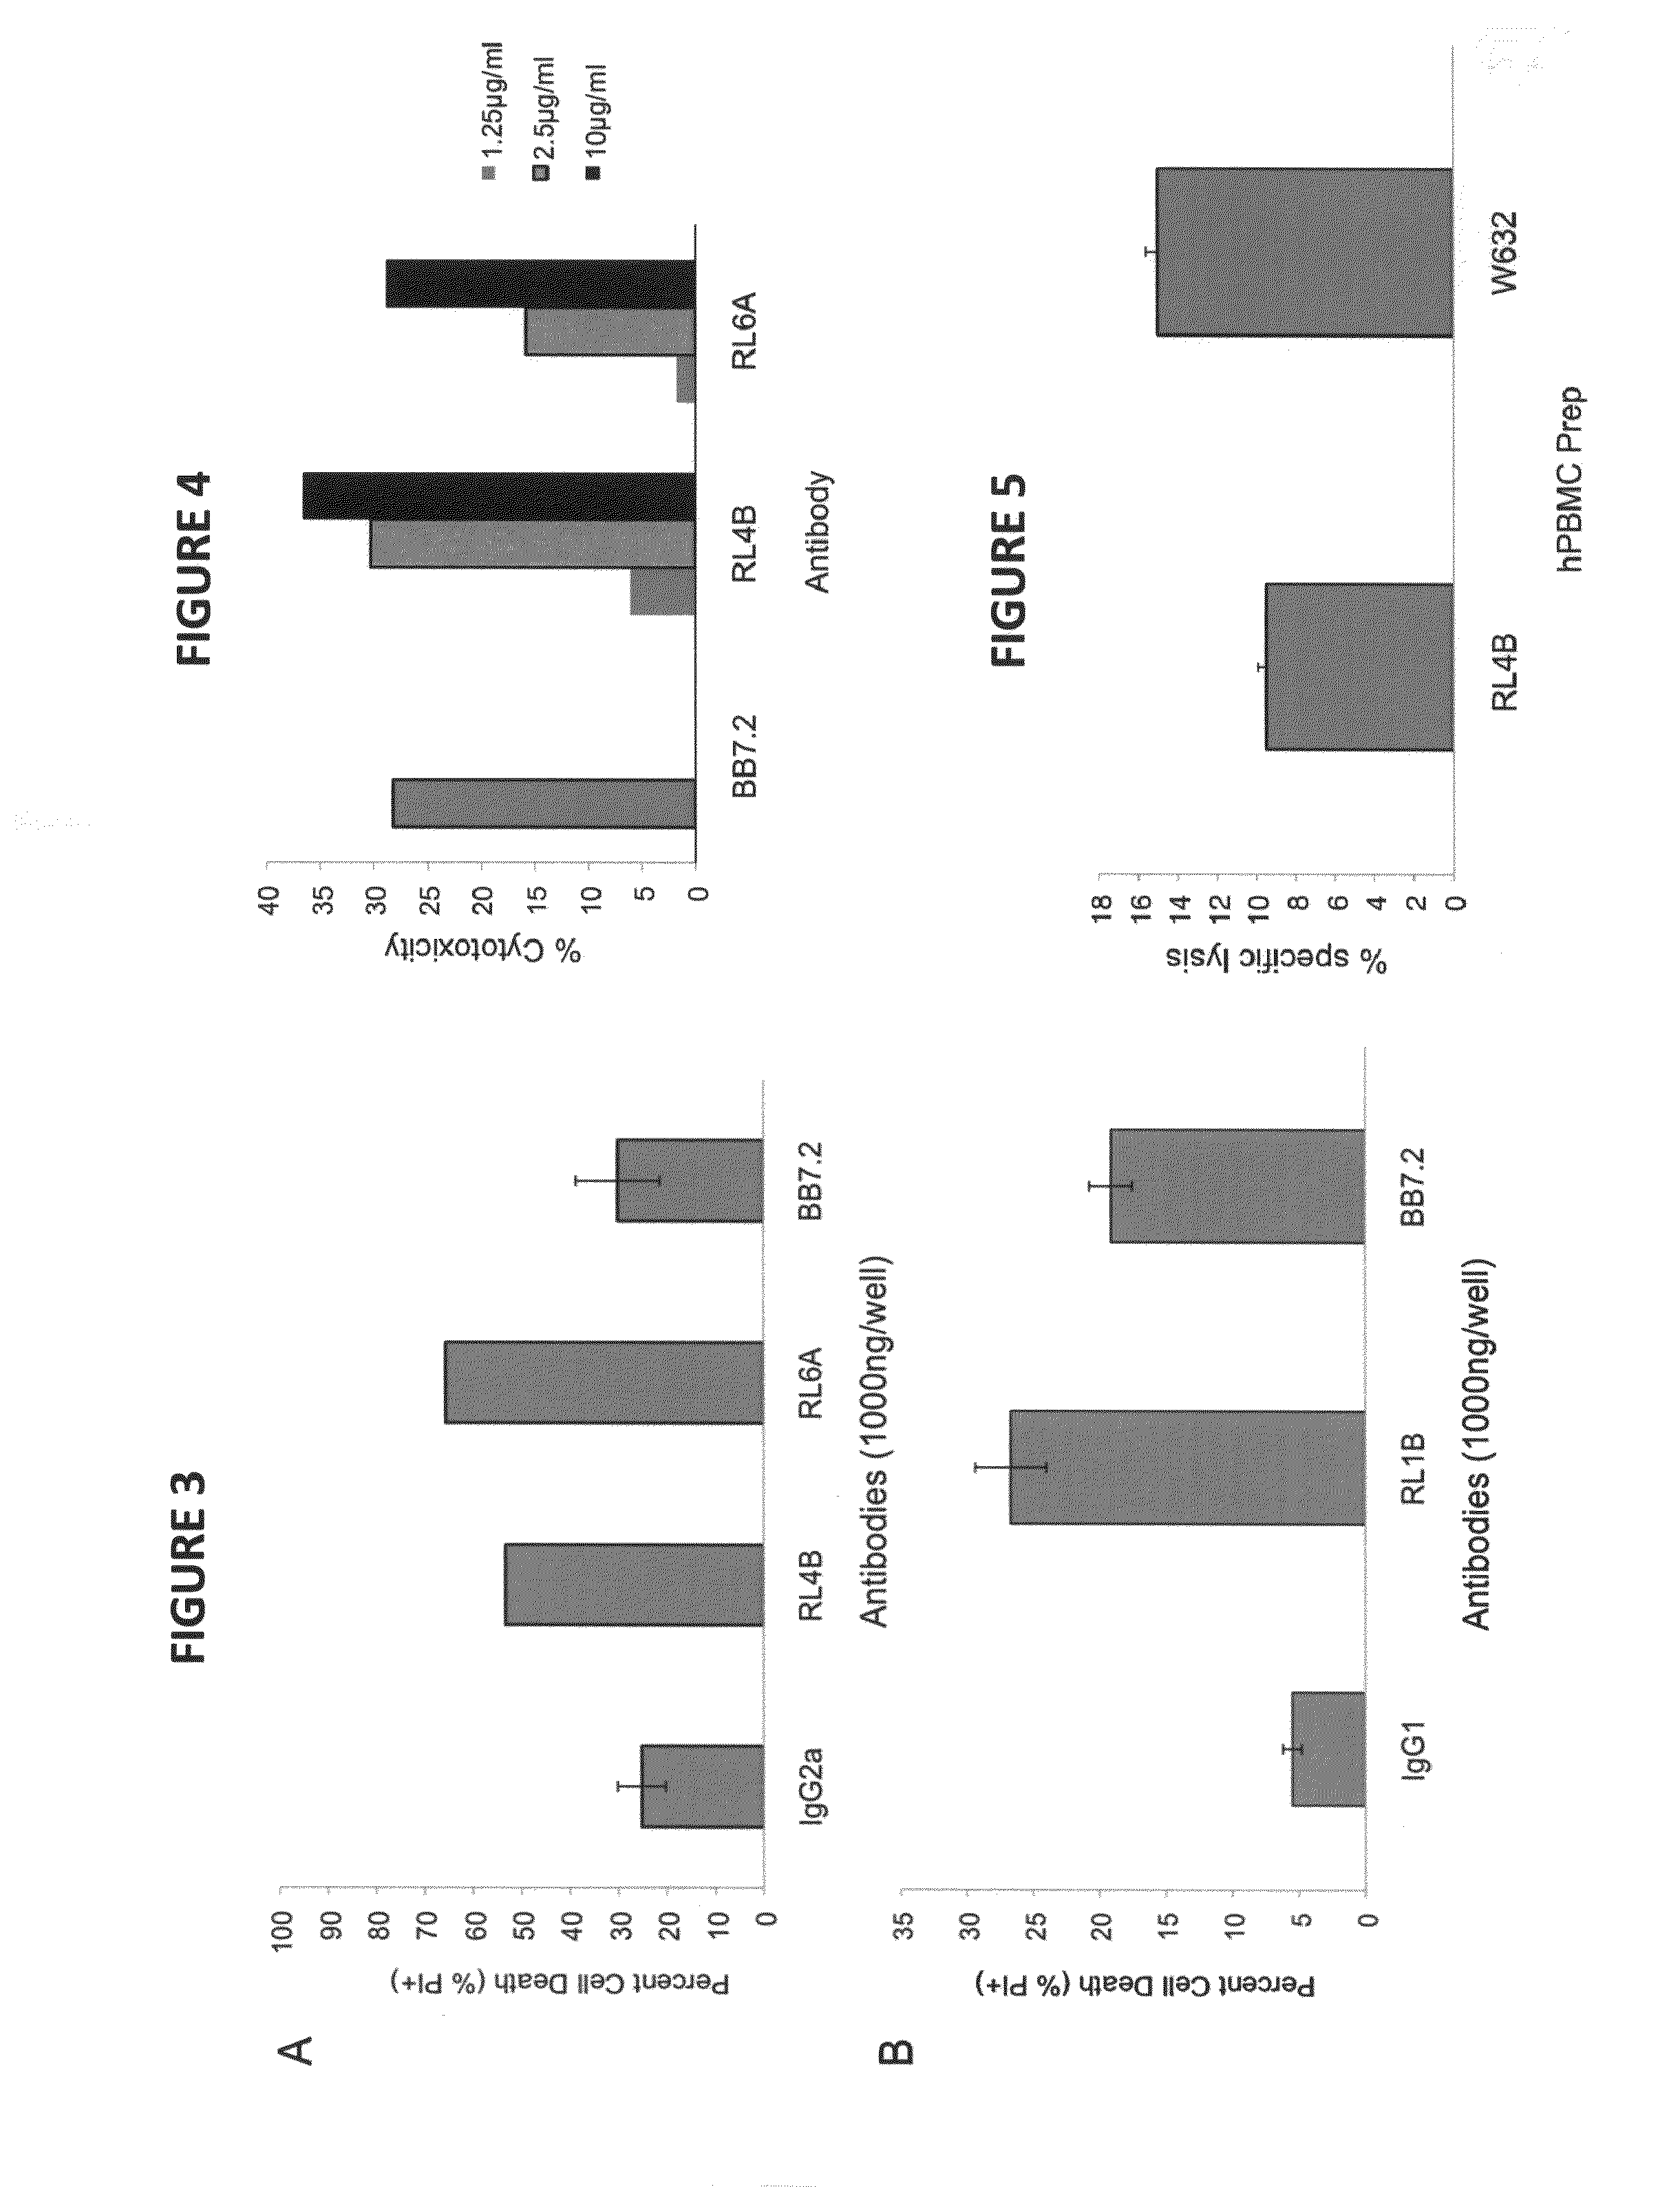 Antibodies as T cell receptor mimics, methods of production and uses thereof